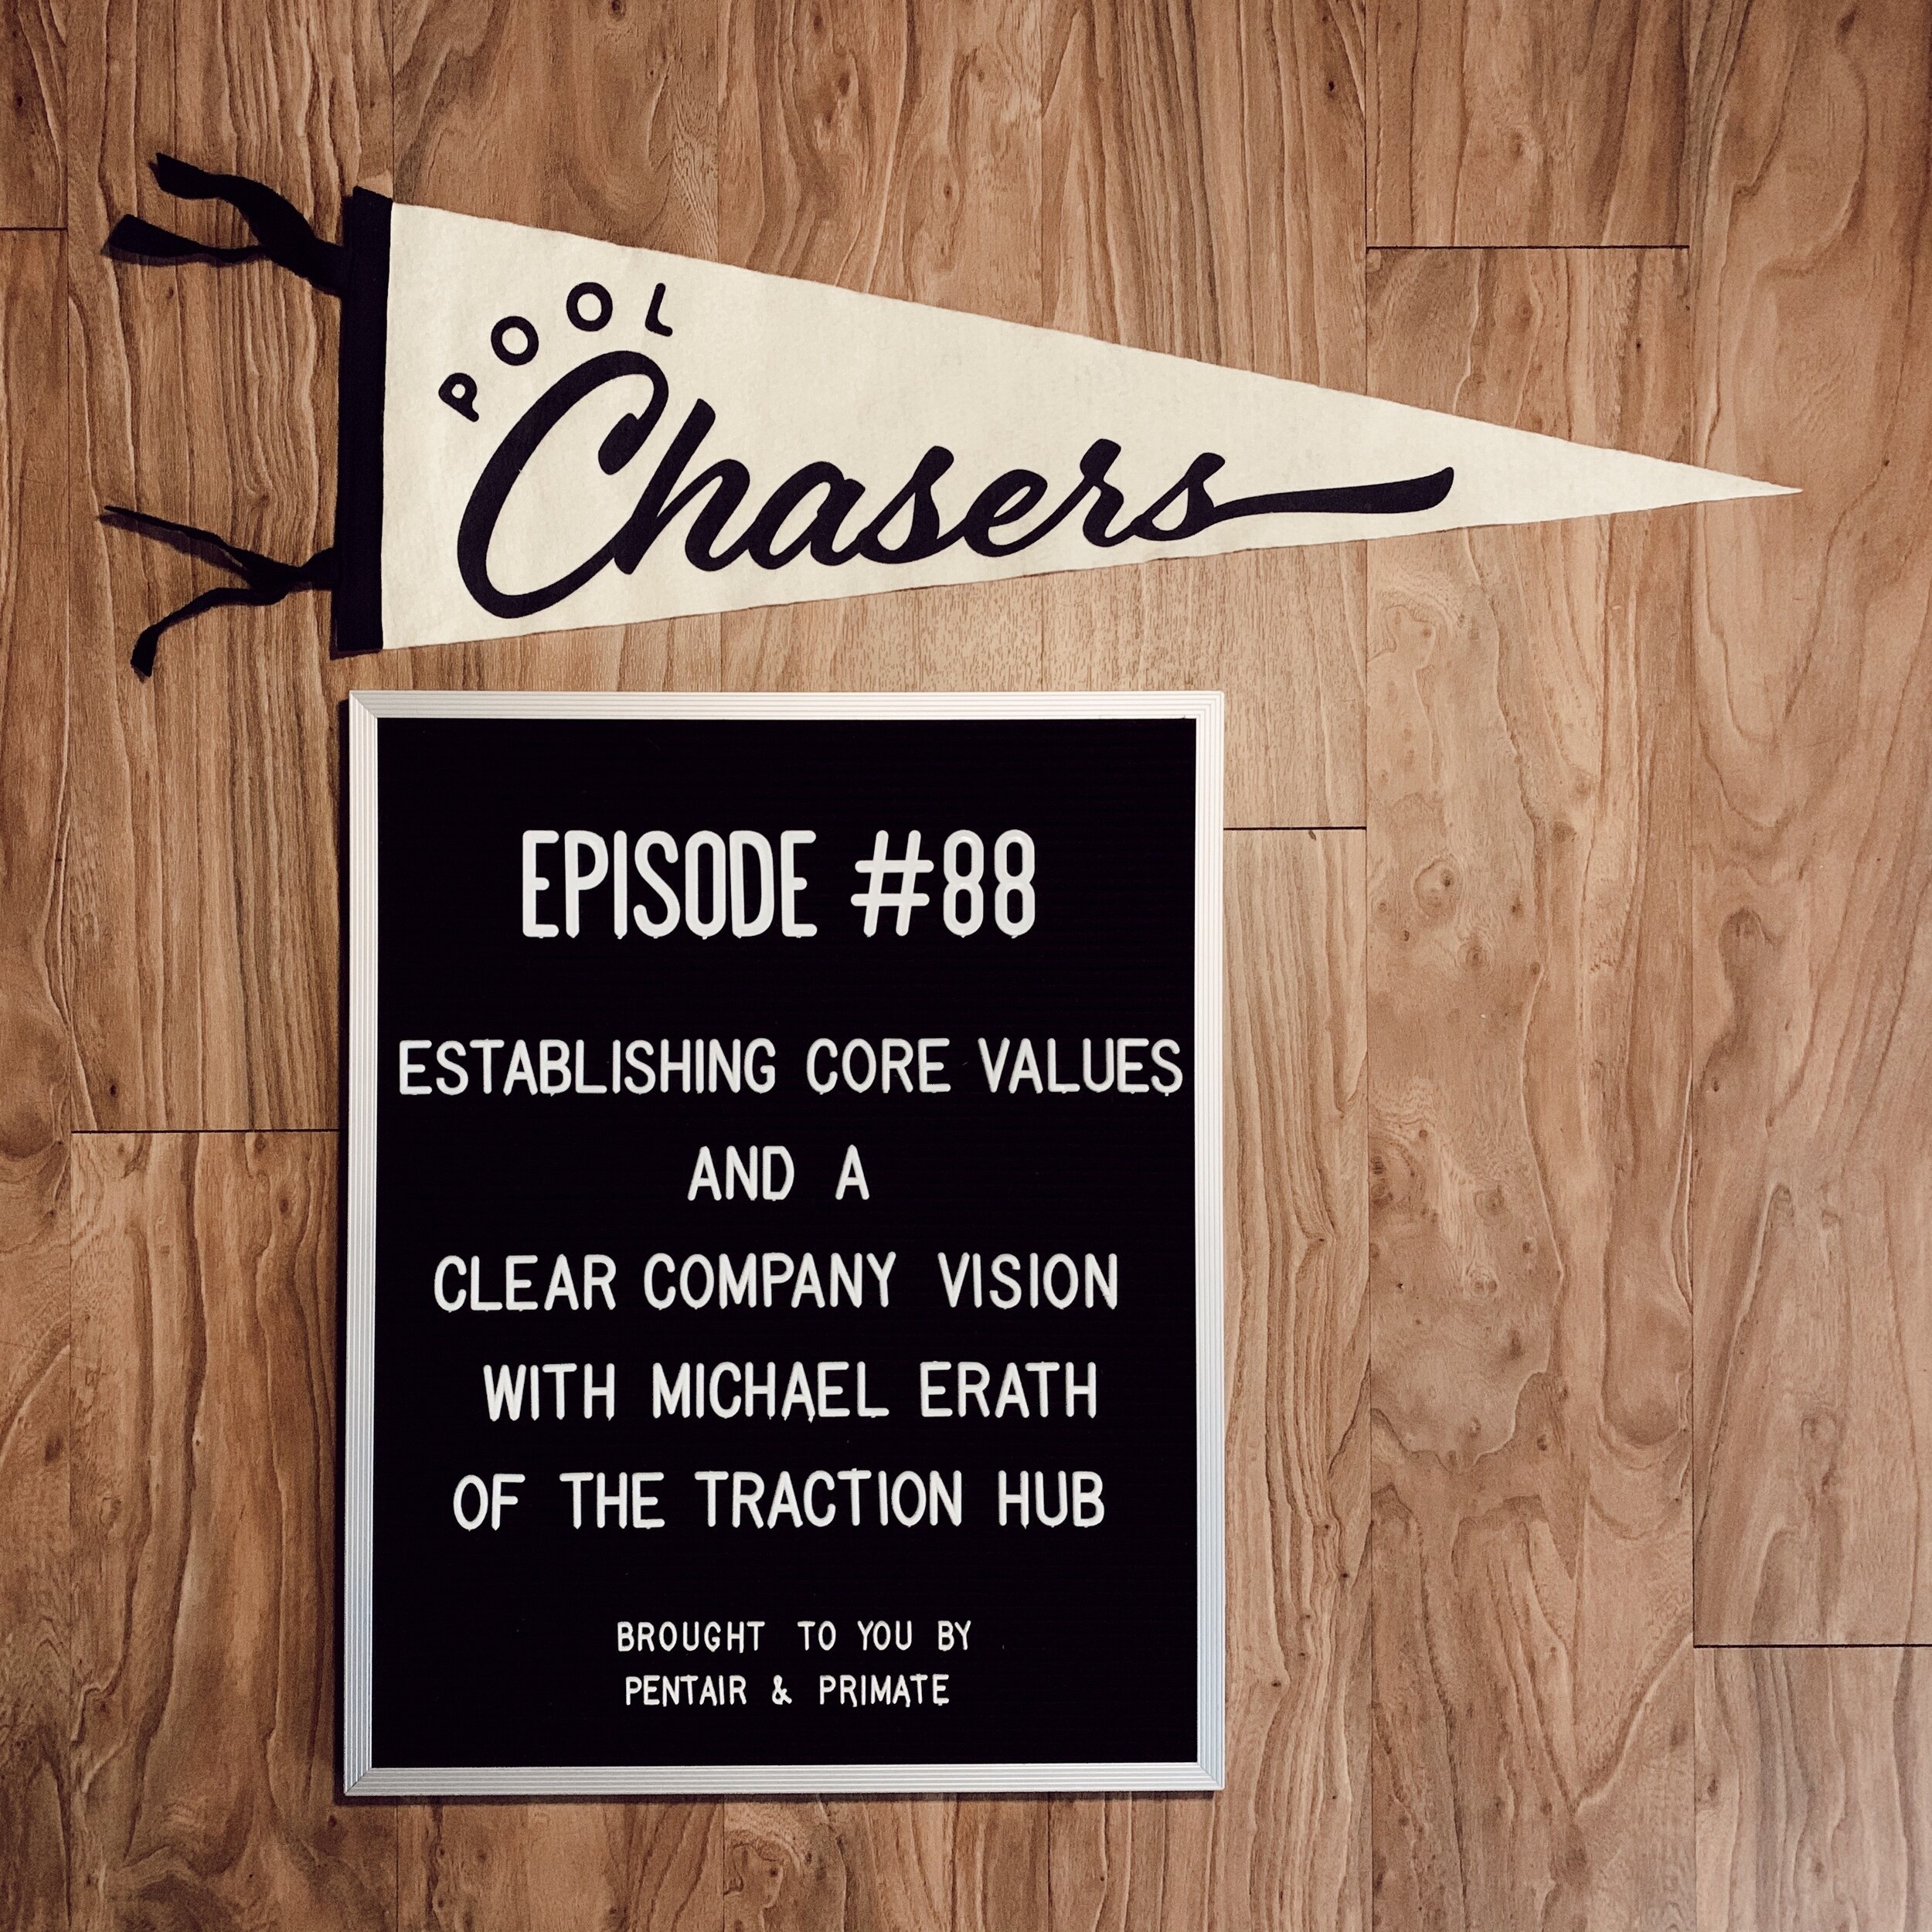 Episode 88 Pool Chasers Podcast Michael Erath